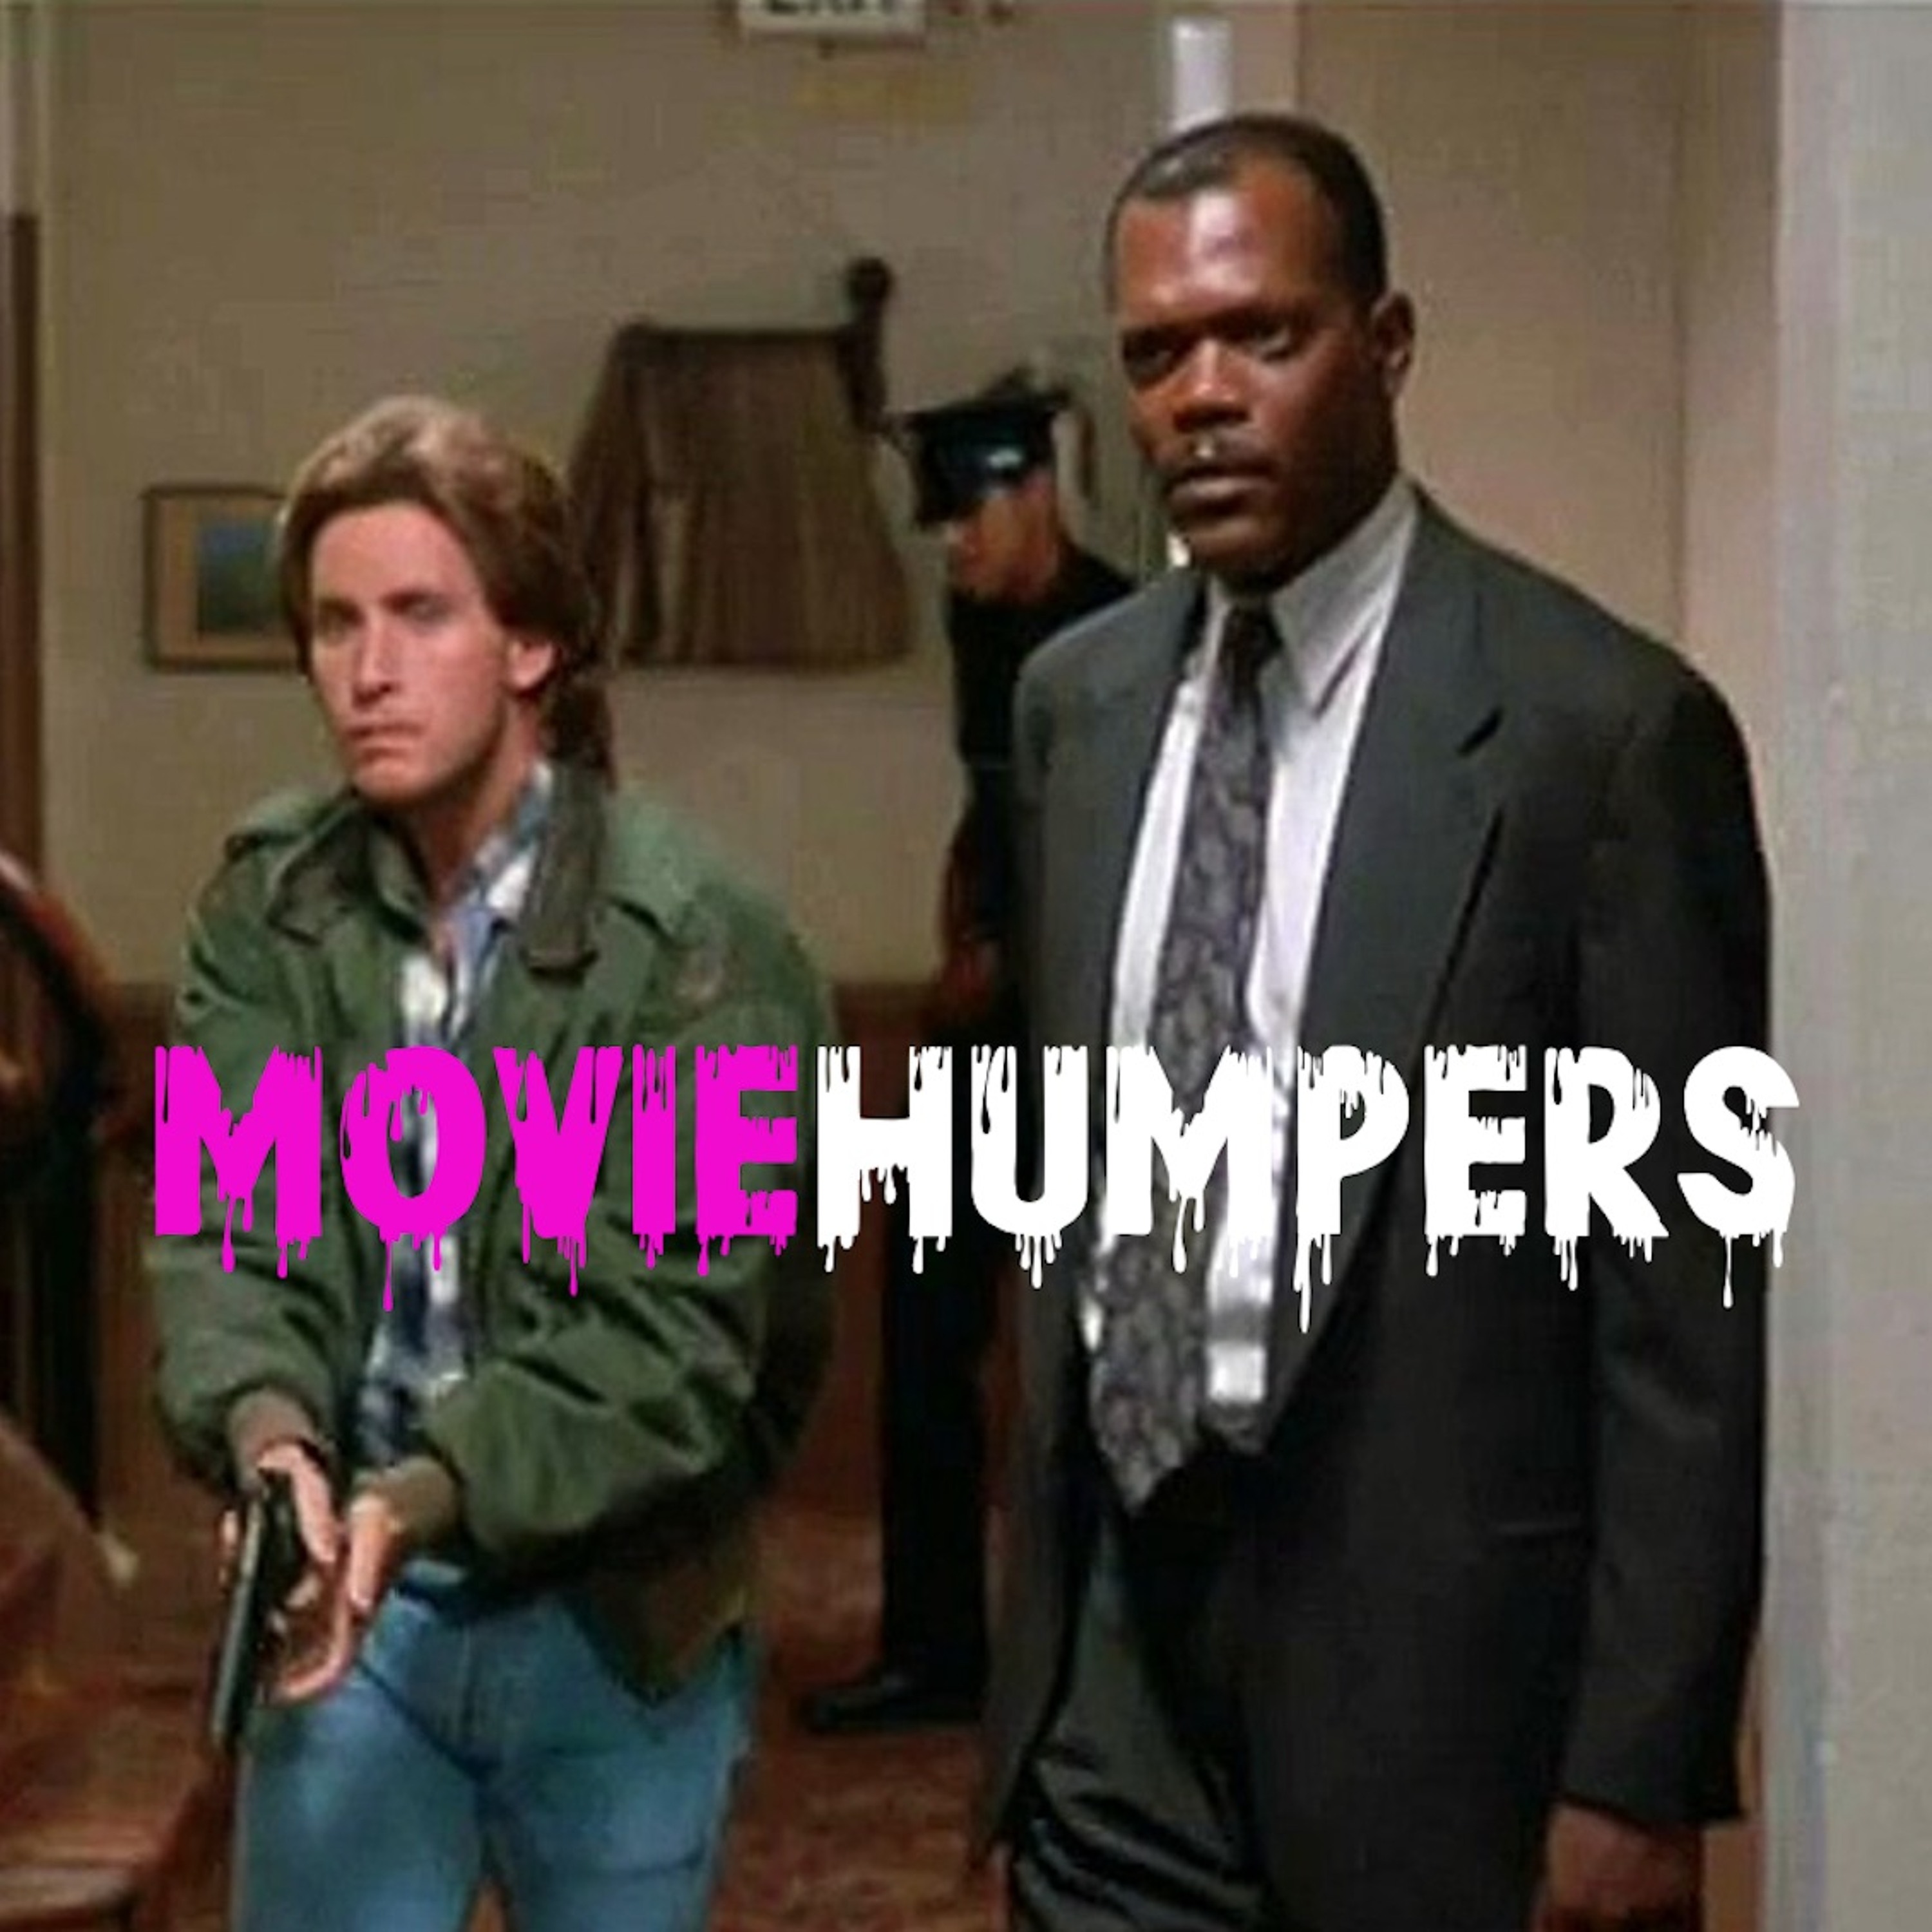 National Lampoon's Loaded Weapon 1 (1993)